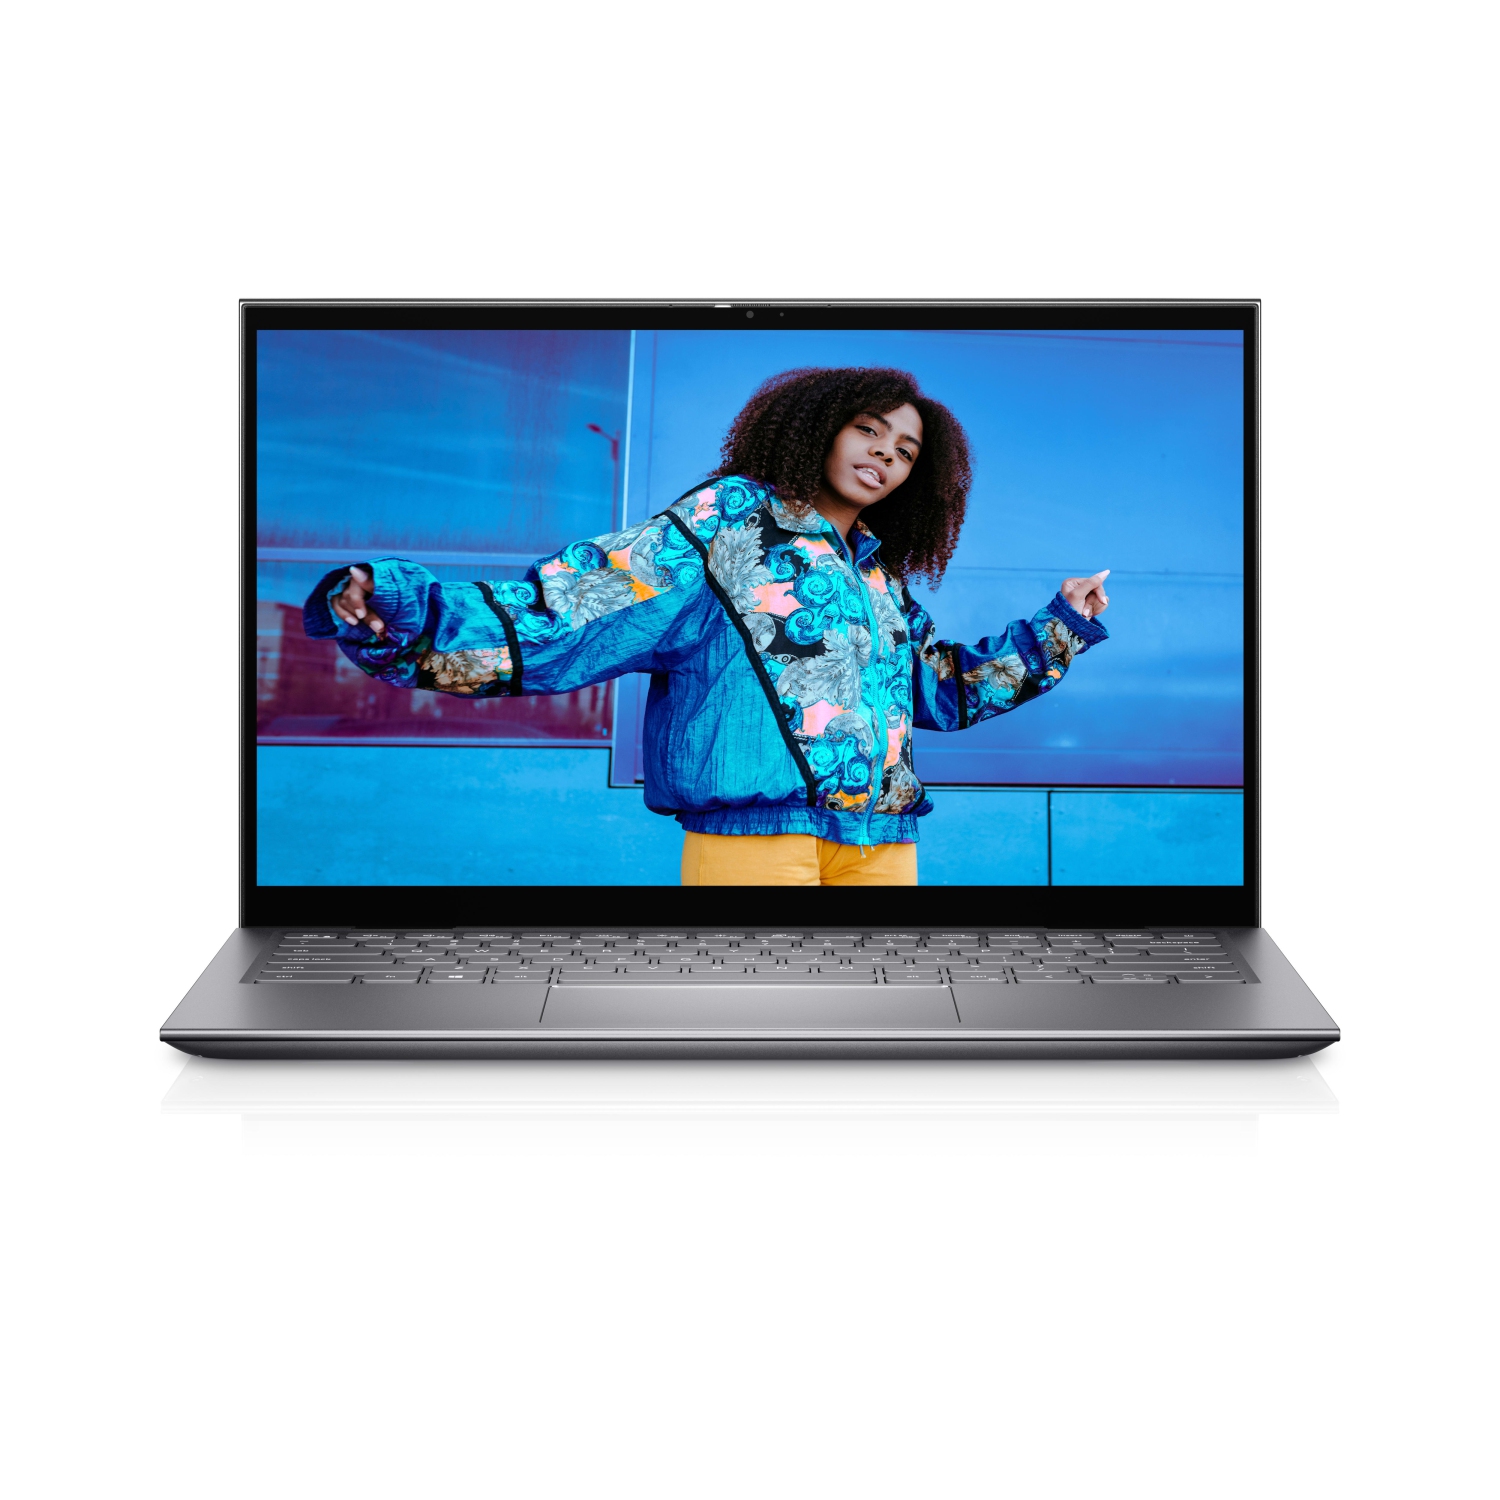 Refurbished (Excellent) – Dell Inspiron 5410 2-in-1 (2021) | 14" FHD Touch | Core i5 - 2TB SSD - 8GB RAM | 4 Cores @ 4.2 GHz - 11th Gen CPU